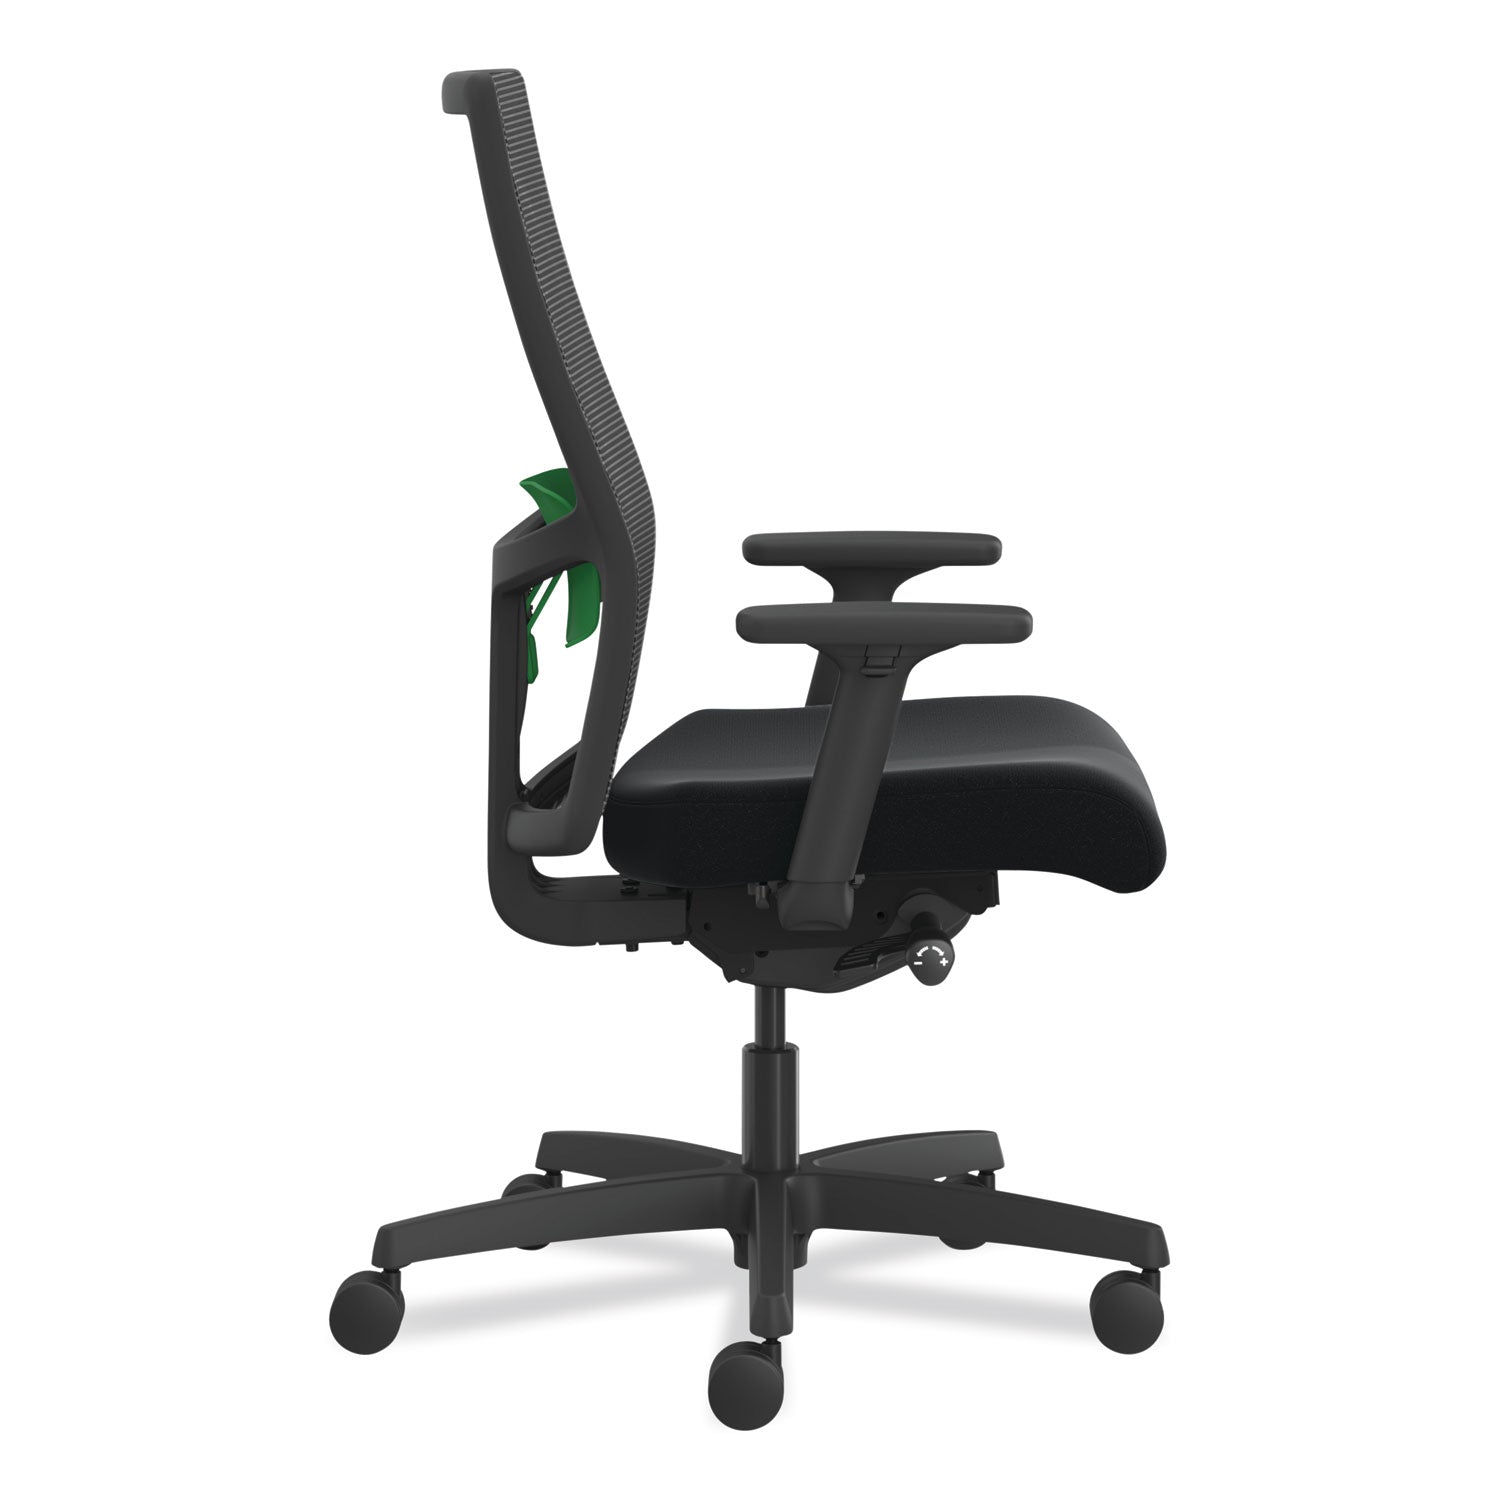 ignition-20-4-way-stretch-mid-back-task-chair-green-adjustable-lumbar-support-black-seat-back-base-ships-in-7-10-bus-days_honi2mm2amc10kt - 2